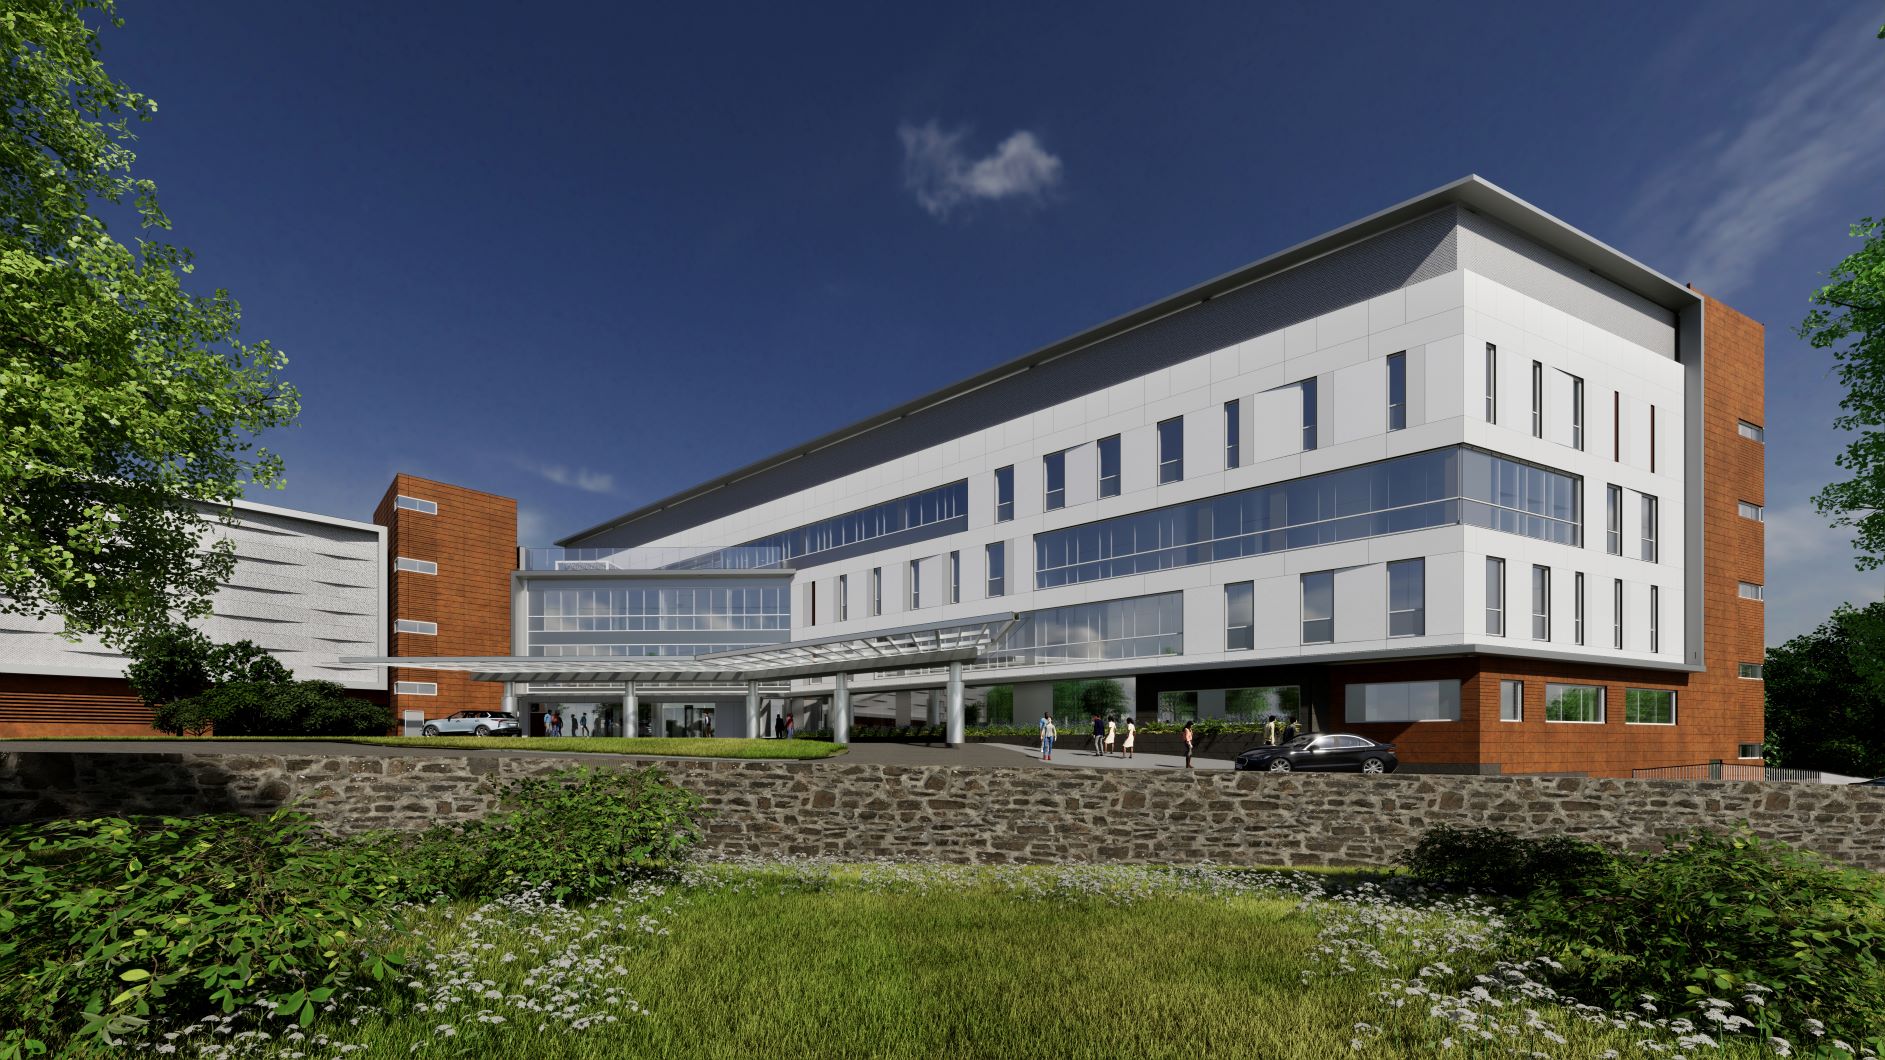 Rendering of exterior of The Cancer Center at Cooperman Barnabas Medical Center